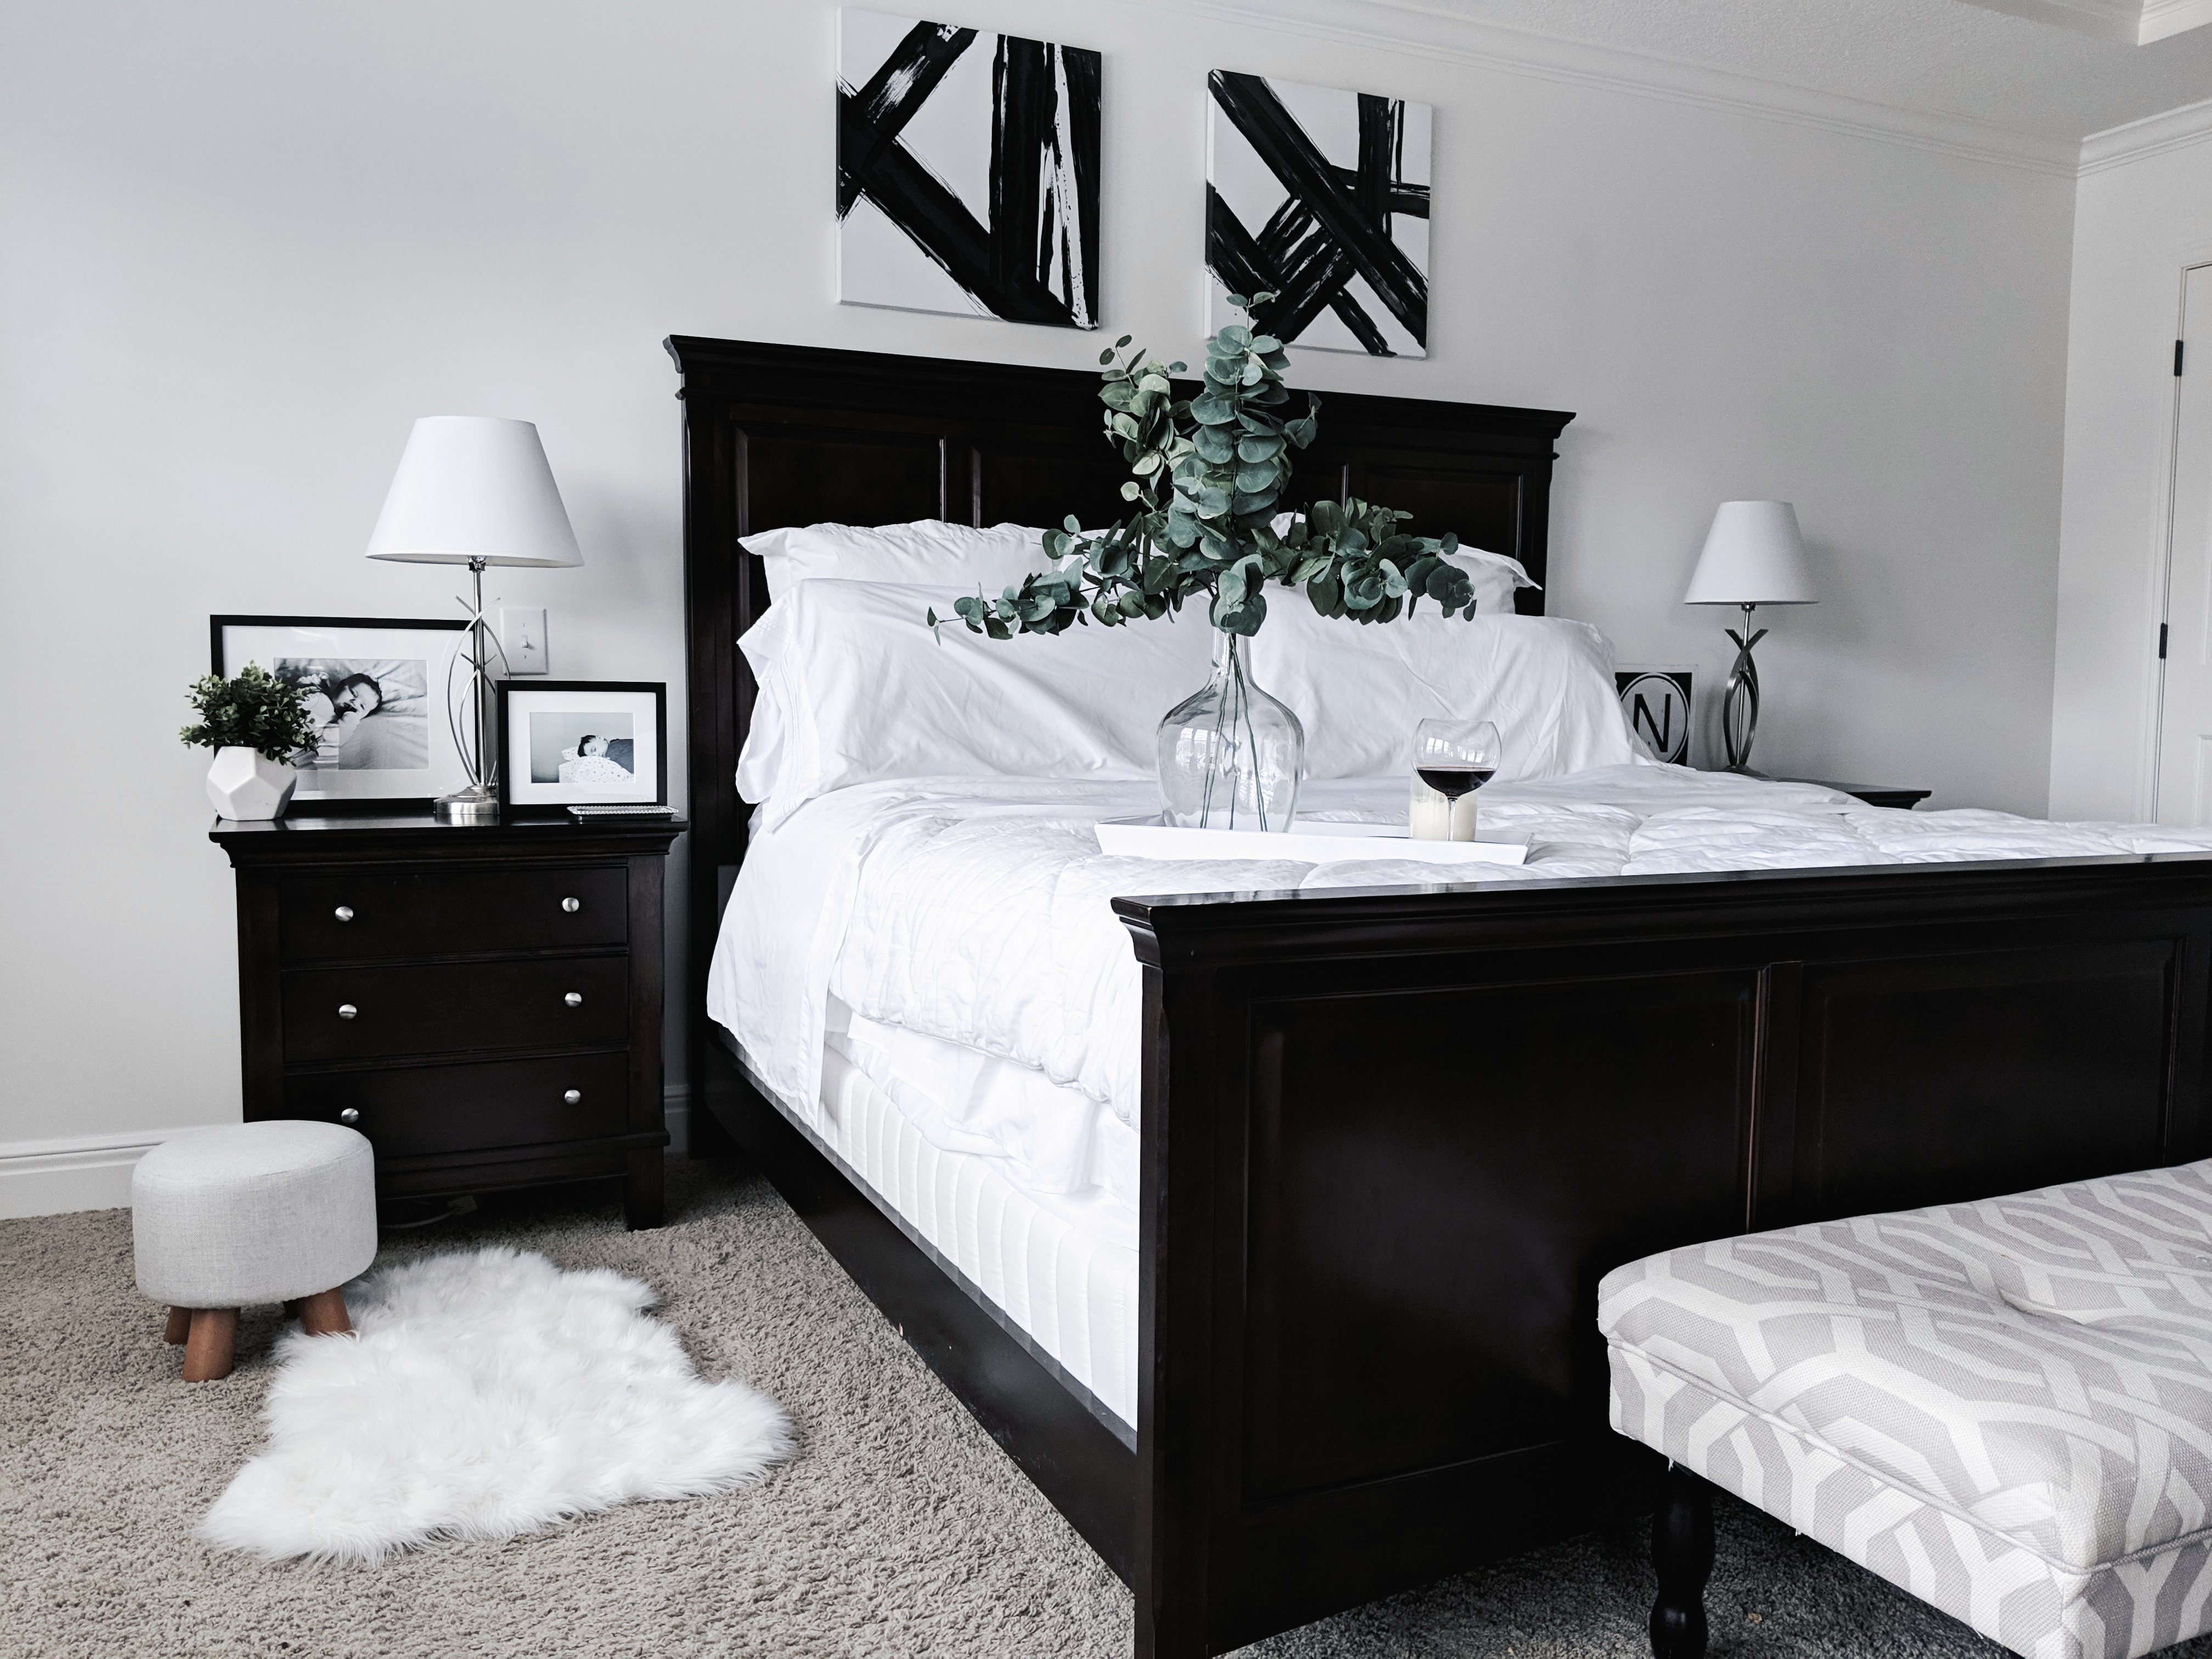 Black and White Master Bedroom Ideas: Inspiration for a monochrome master bedroom with classic black and white decor. Keep your bedroom sleek and modern with this chic black and white decor. The best part: all sources are affordable! Master bedroom inspo, master bedroom decor, white bedding, white bedroom. #MasterBedroom #HomeDecor #Modern #LTKhome